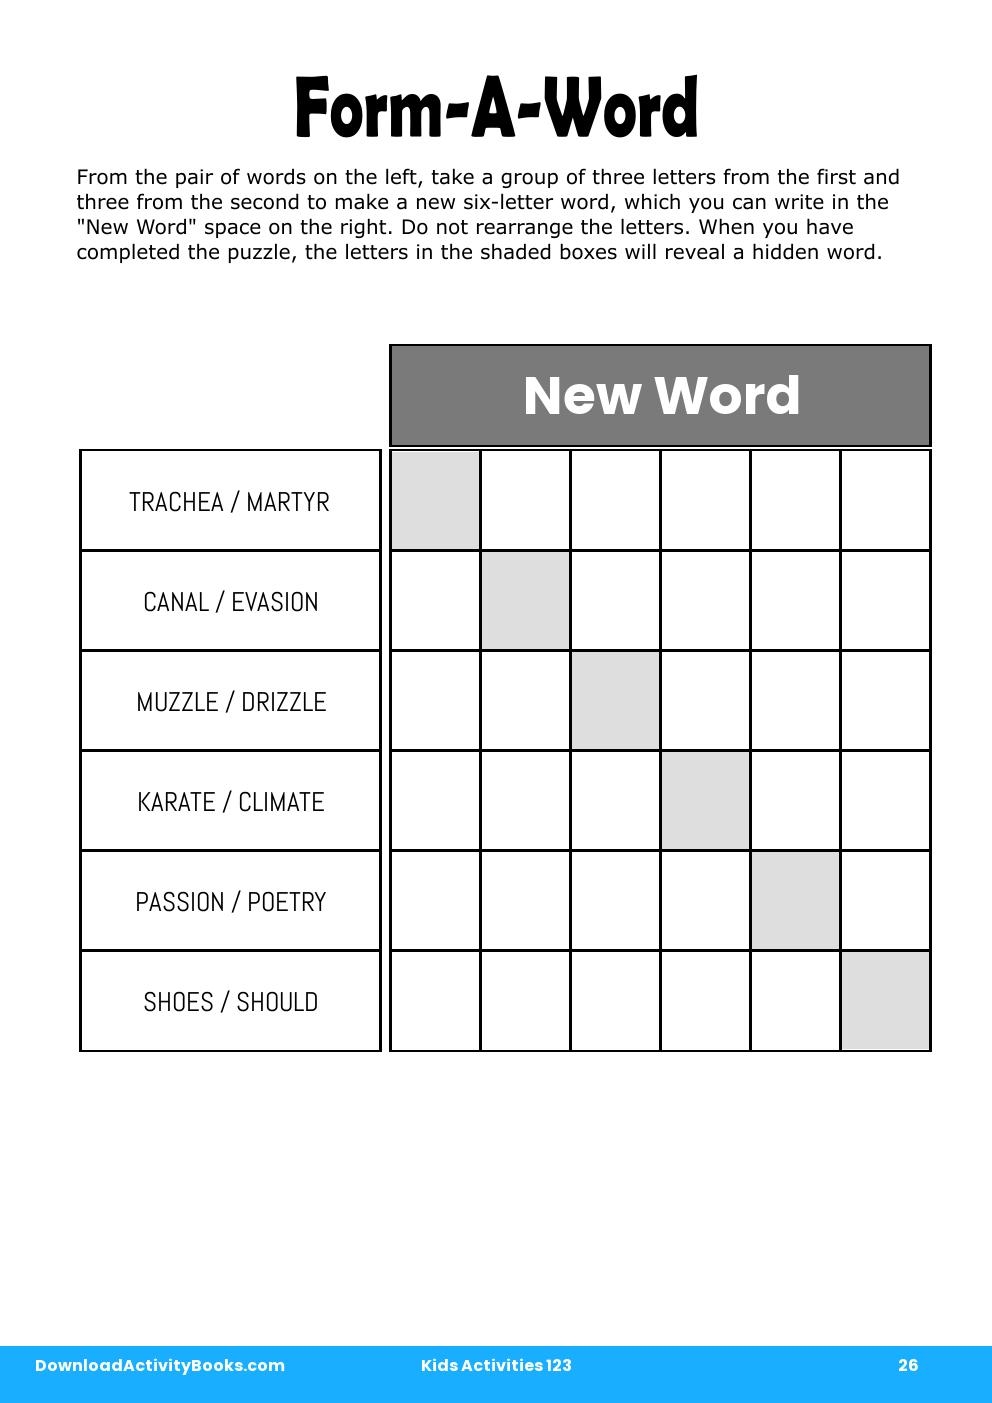 Form-A-Word in Kids Activities 123